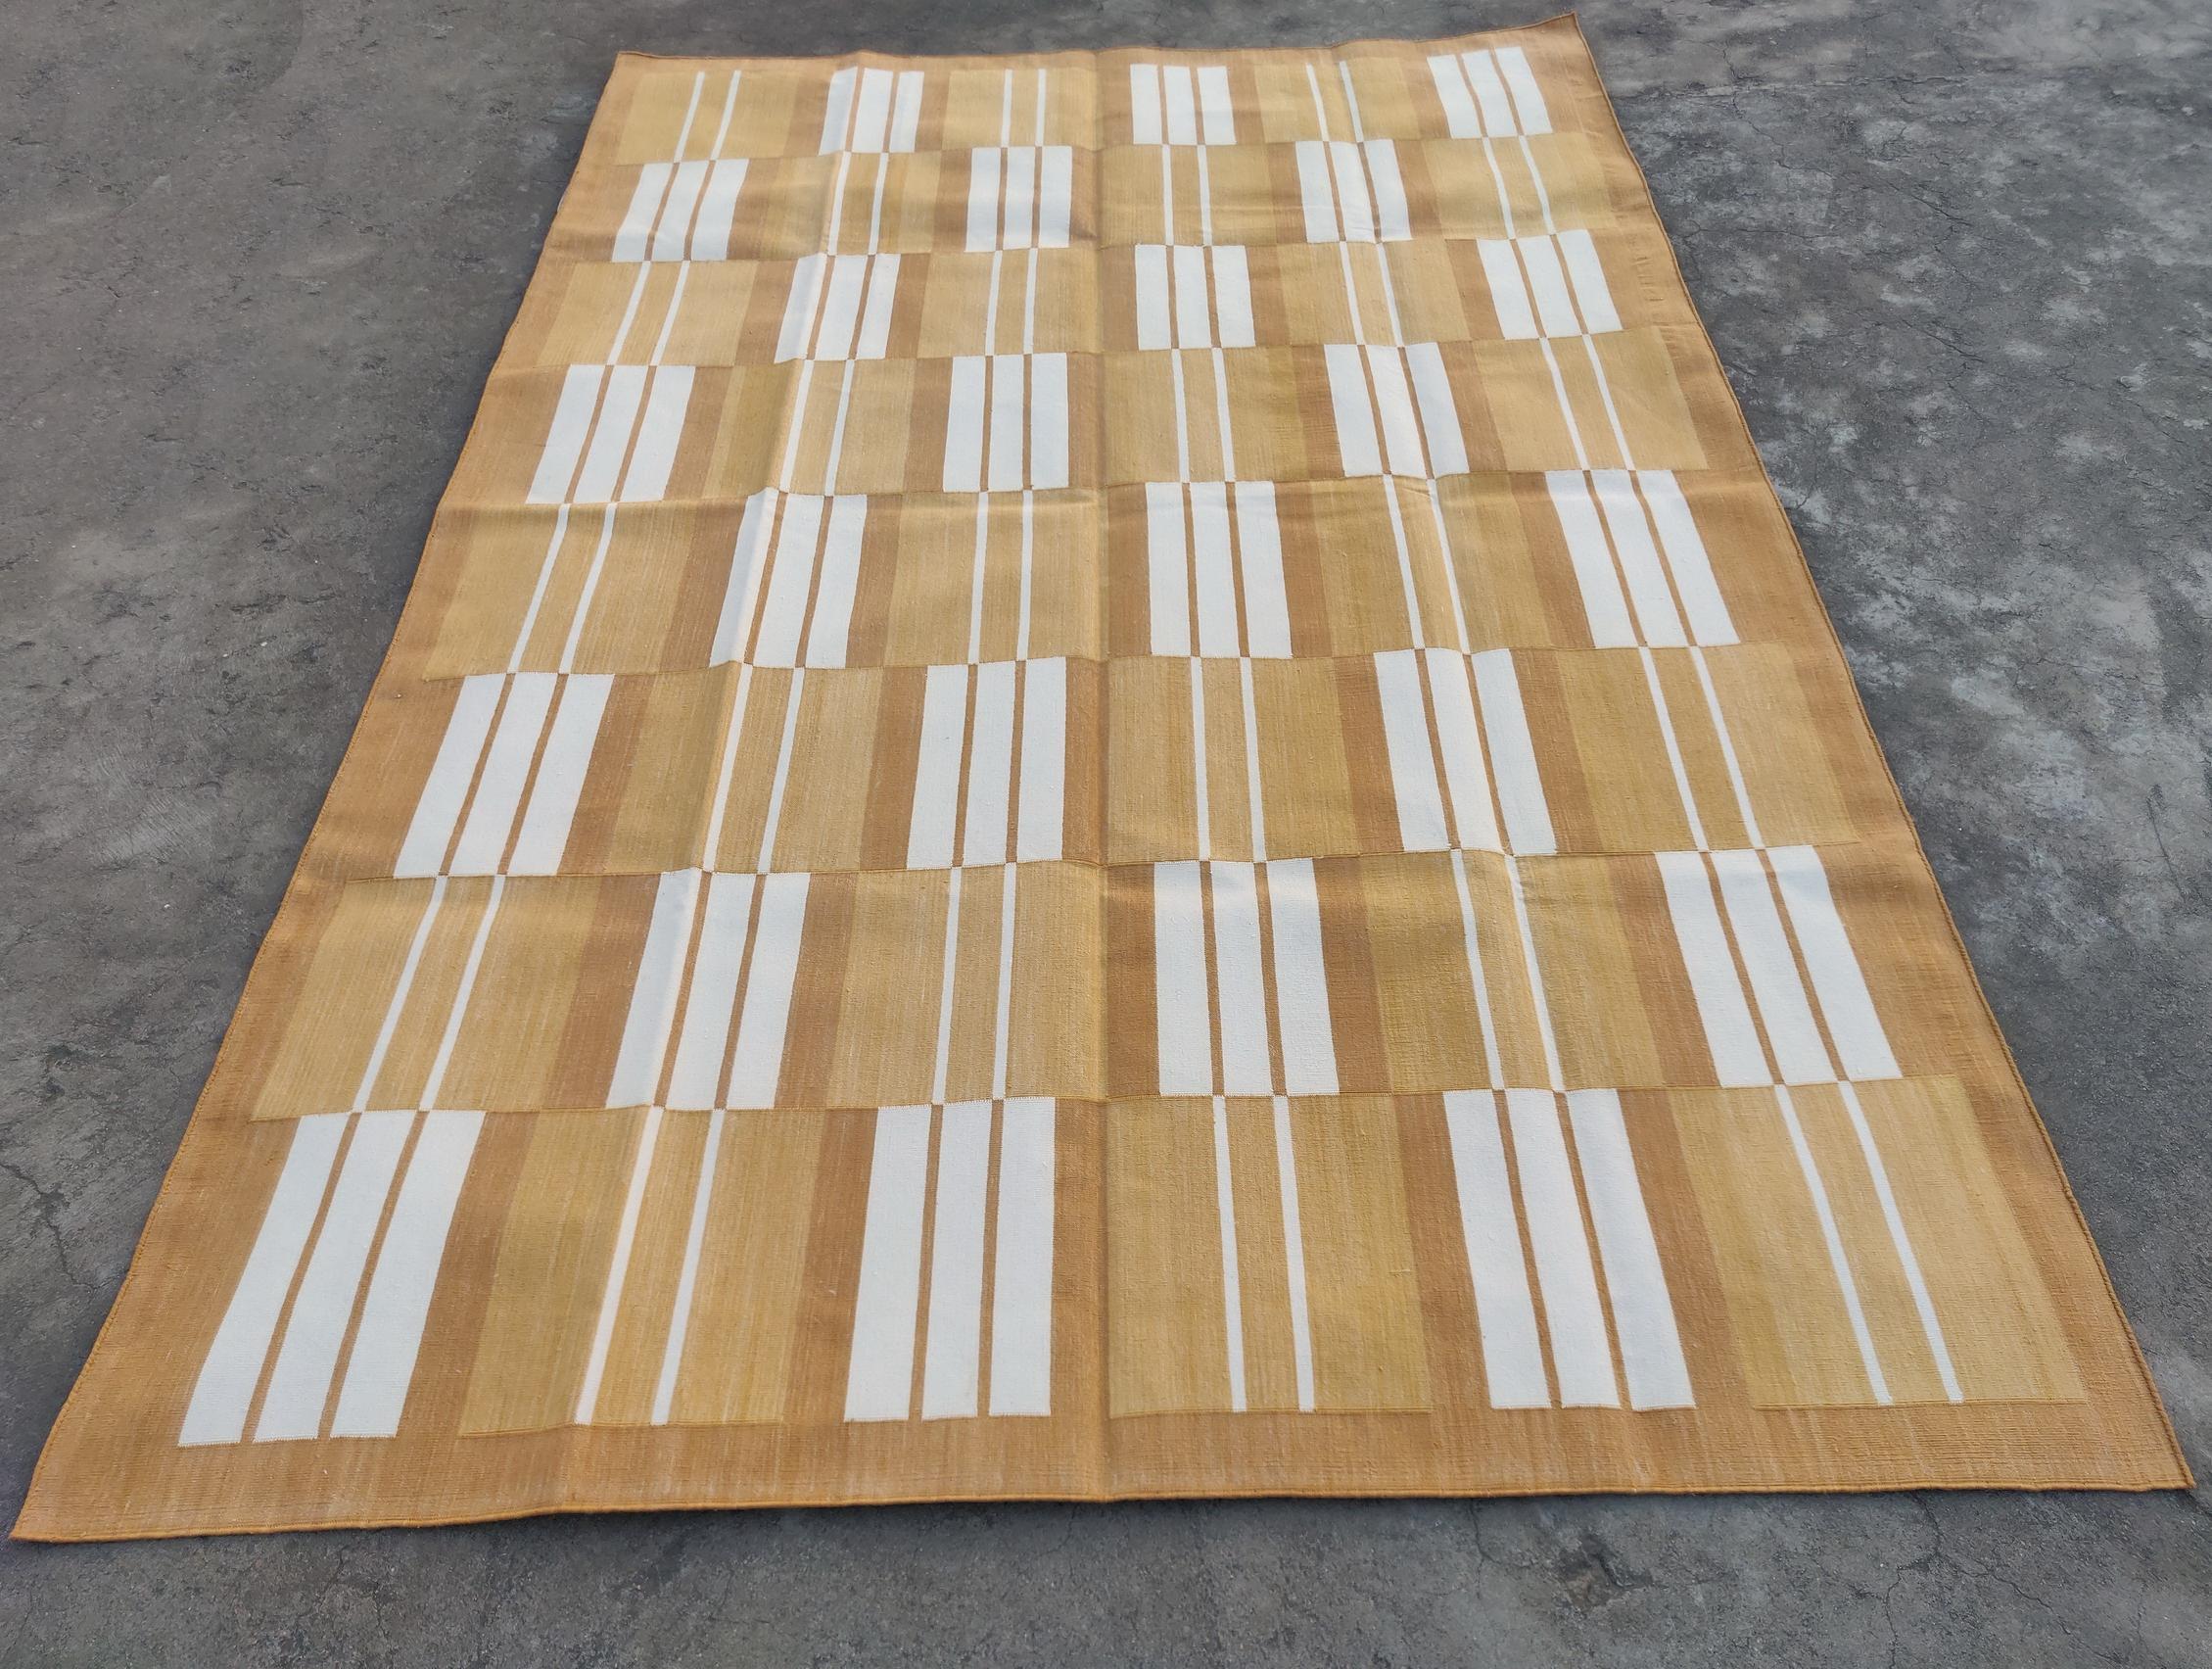 Hand-Woven Handmade Cotton Area Flat Weave Rug, Mustard & White Striped Indian Dhurrie Rug For Sale